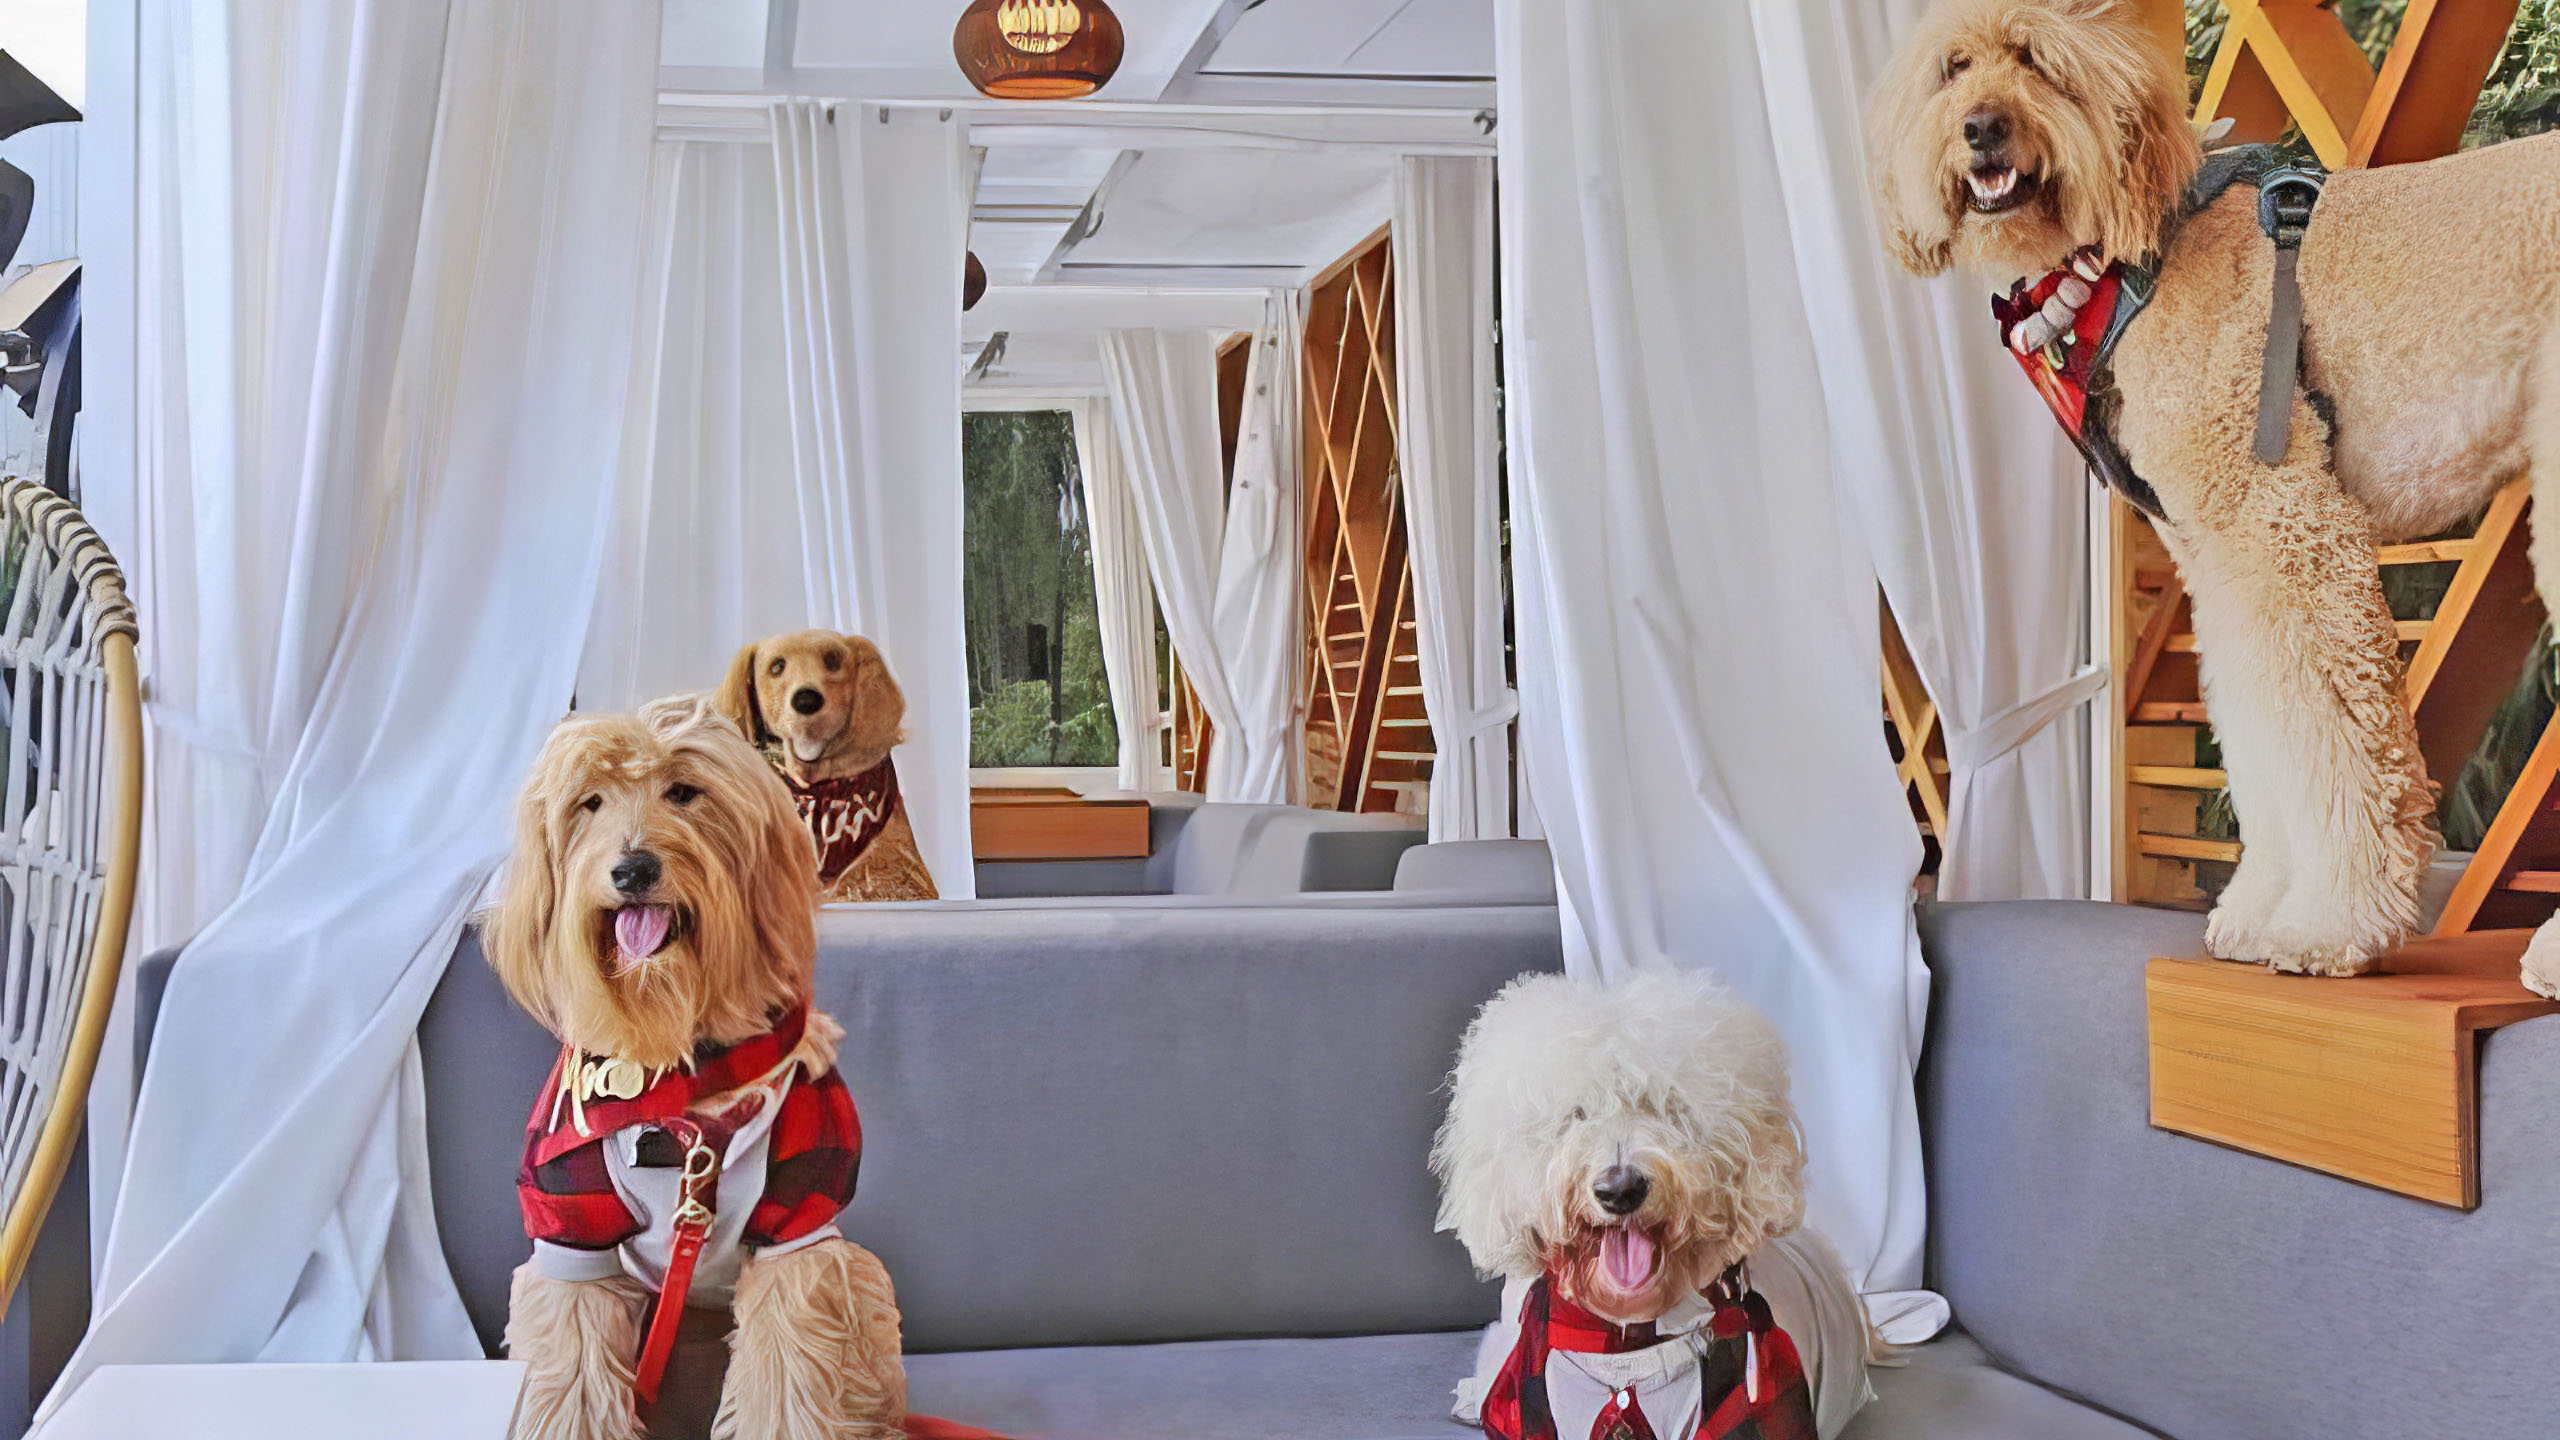 Four fluffy dogs in red harnesses rest in a stylish outdoor seating area of a chic Sacramento hotel. The setting features white drapes and wooden decor. One dog relaxes on a couch, another lies on the floor, while two others perch on raised wooden platforms, all appearing relaxed and content.